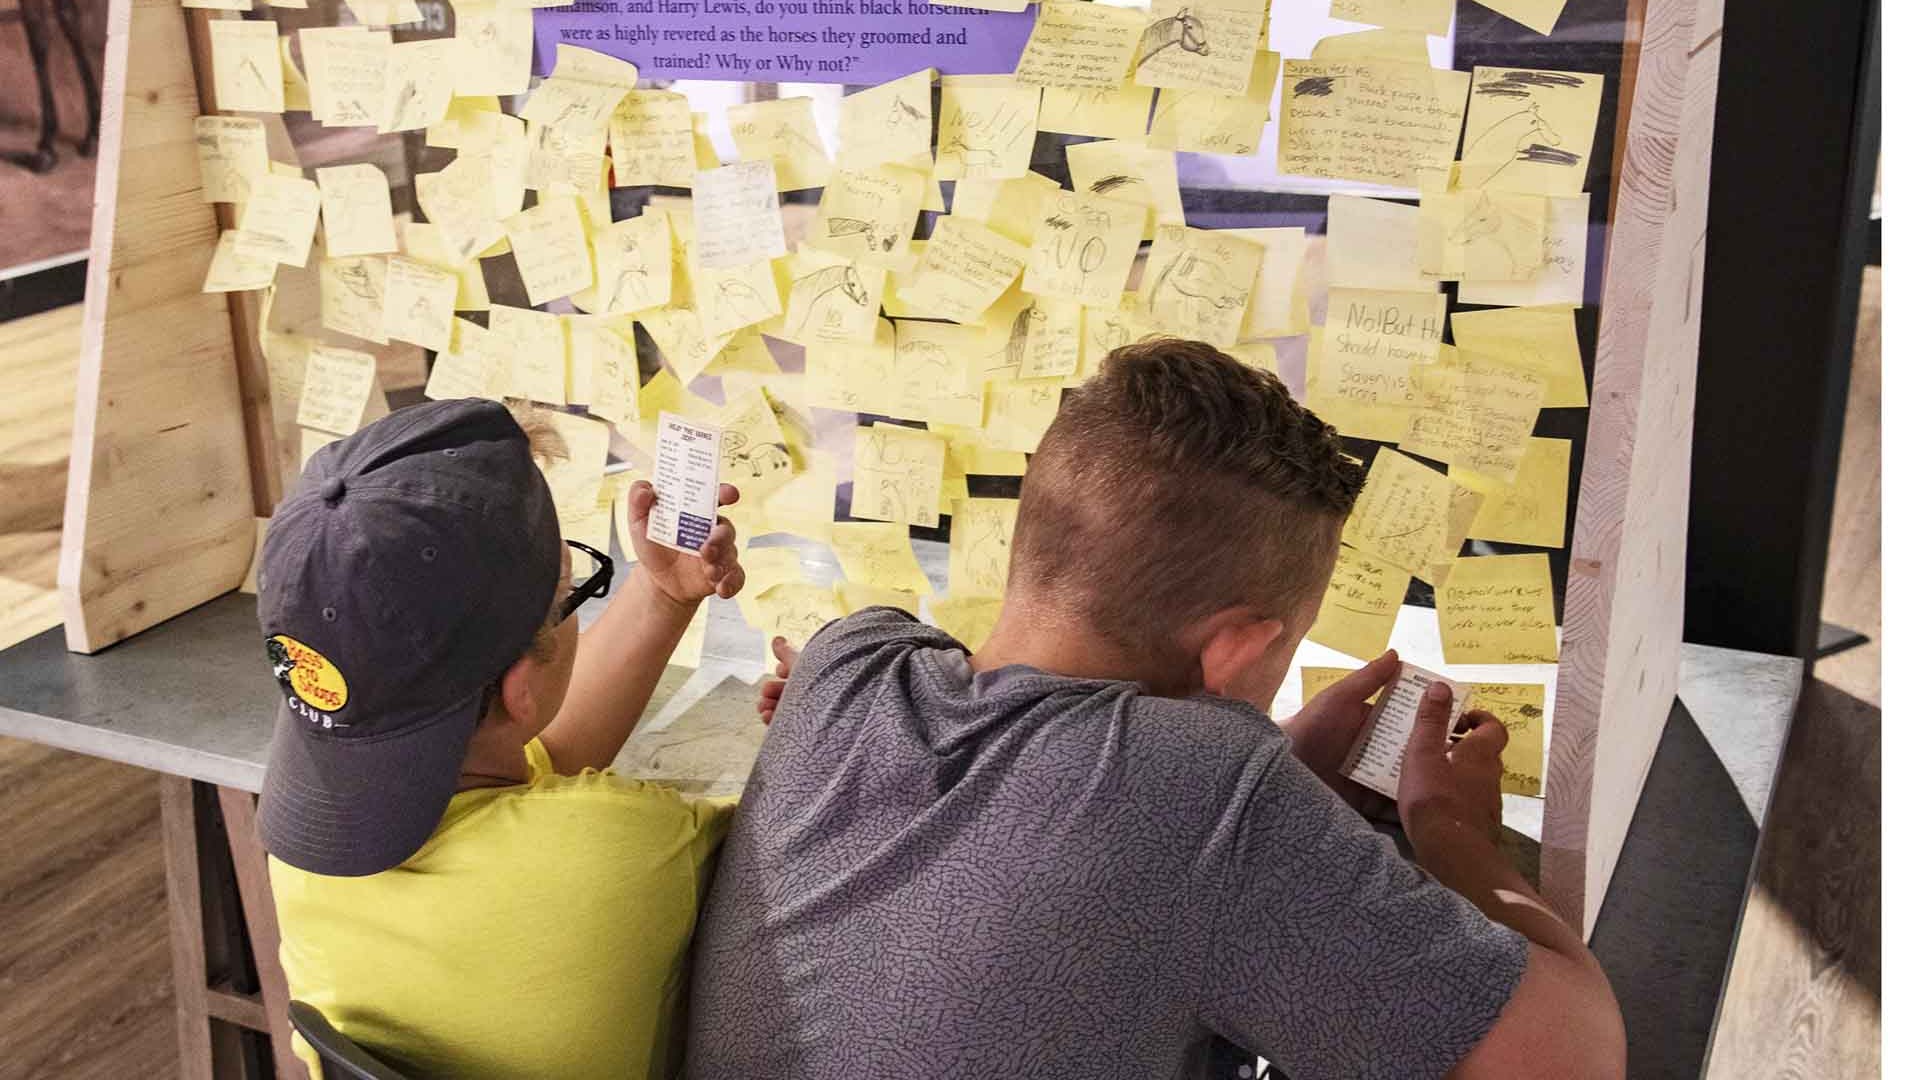 boys read other visitors' notes in museum exhibit